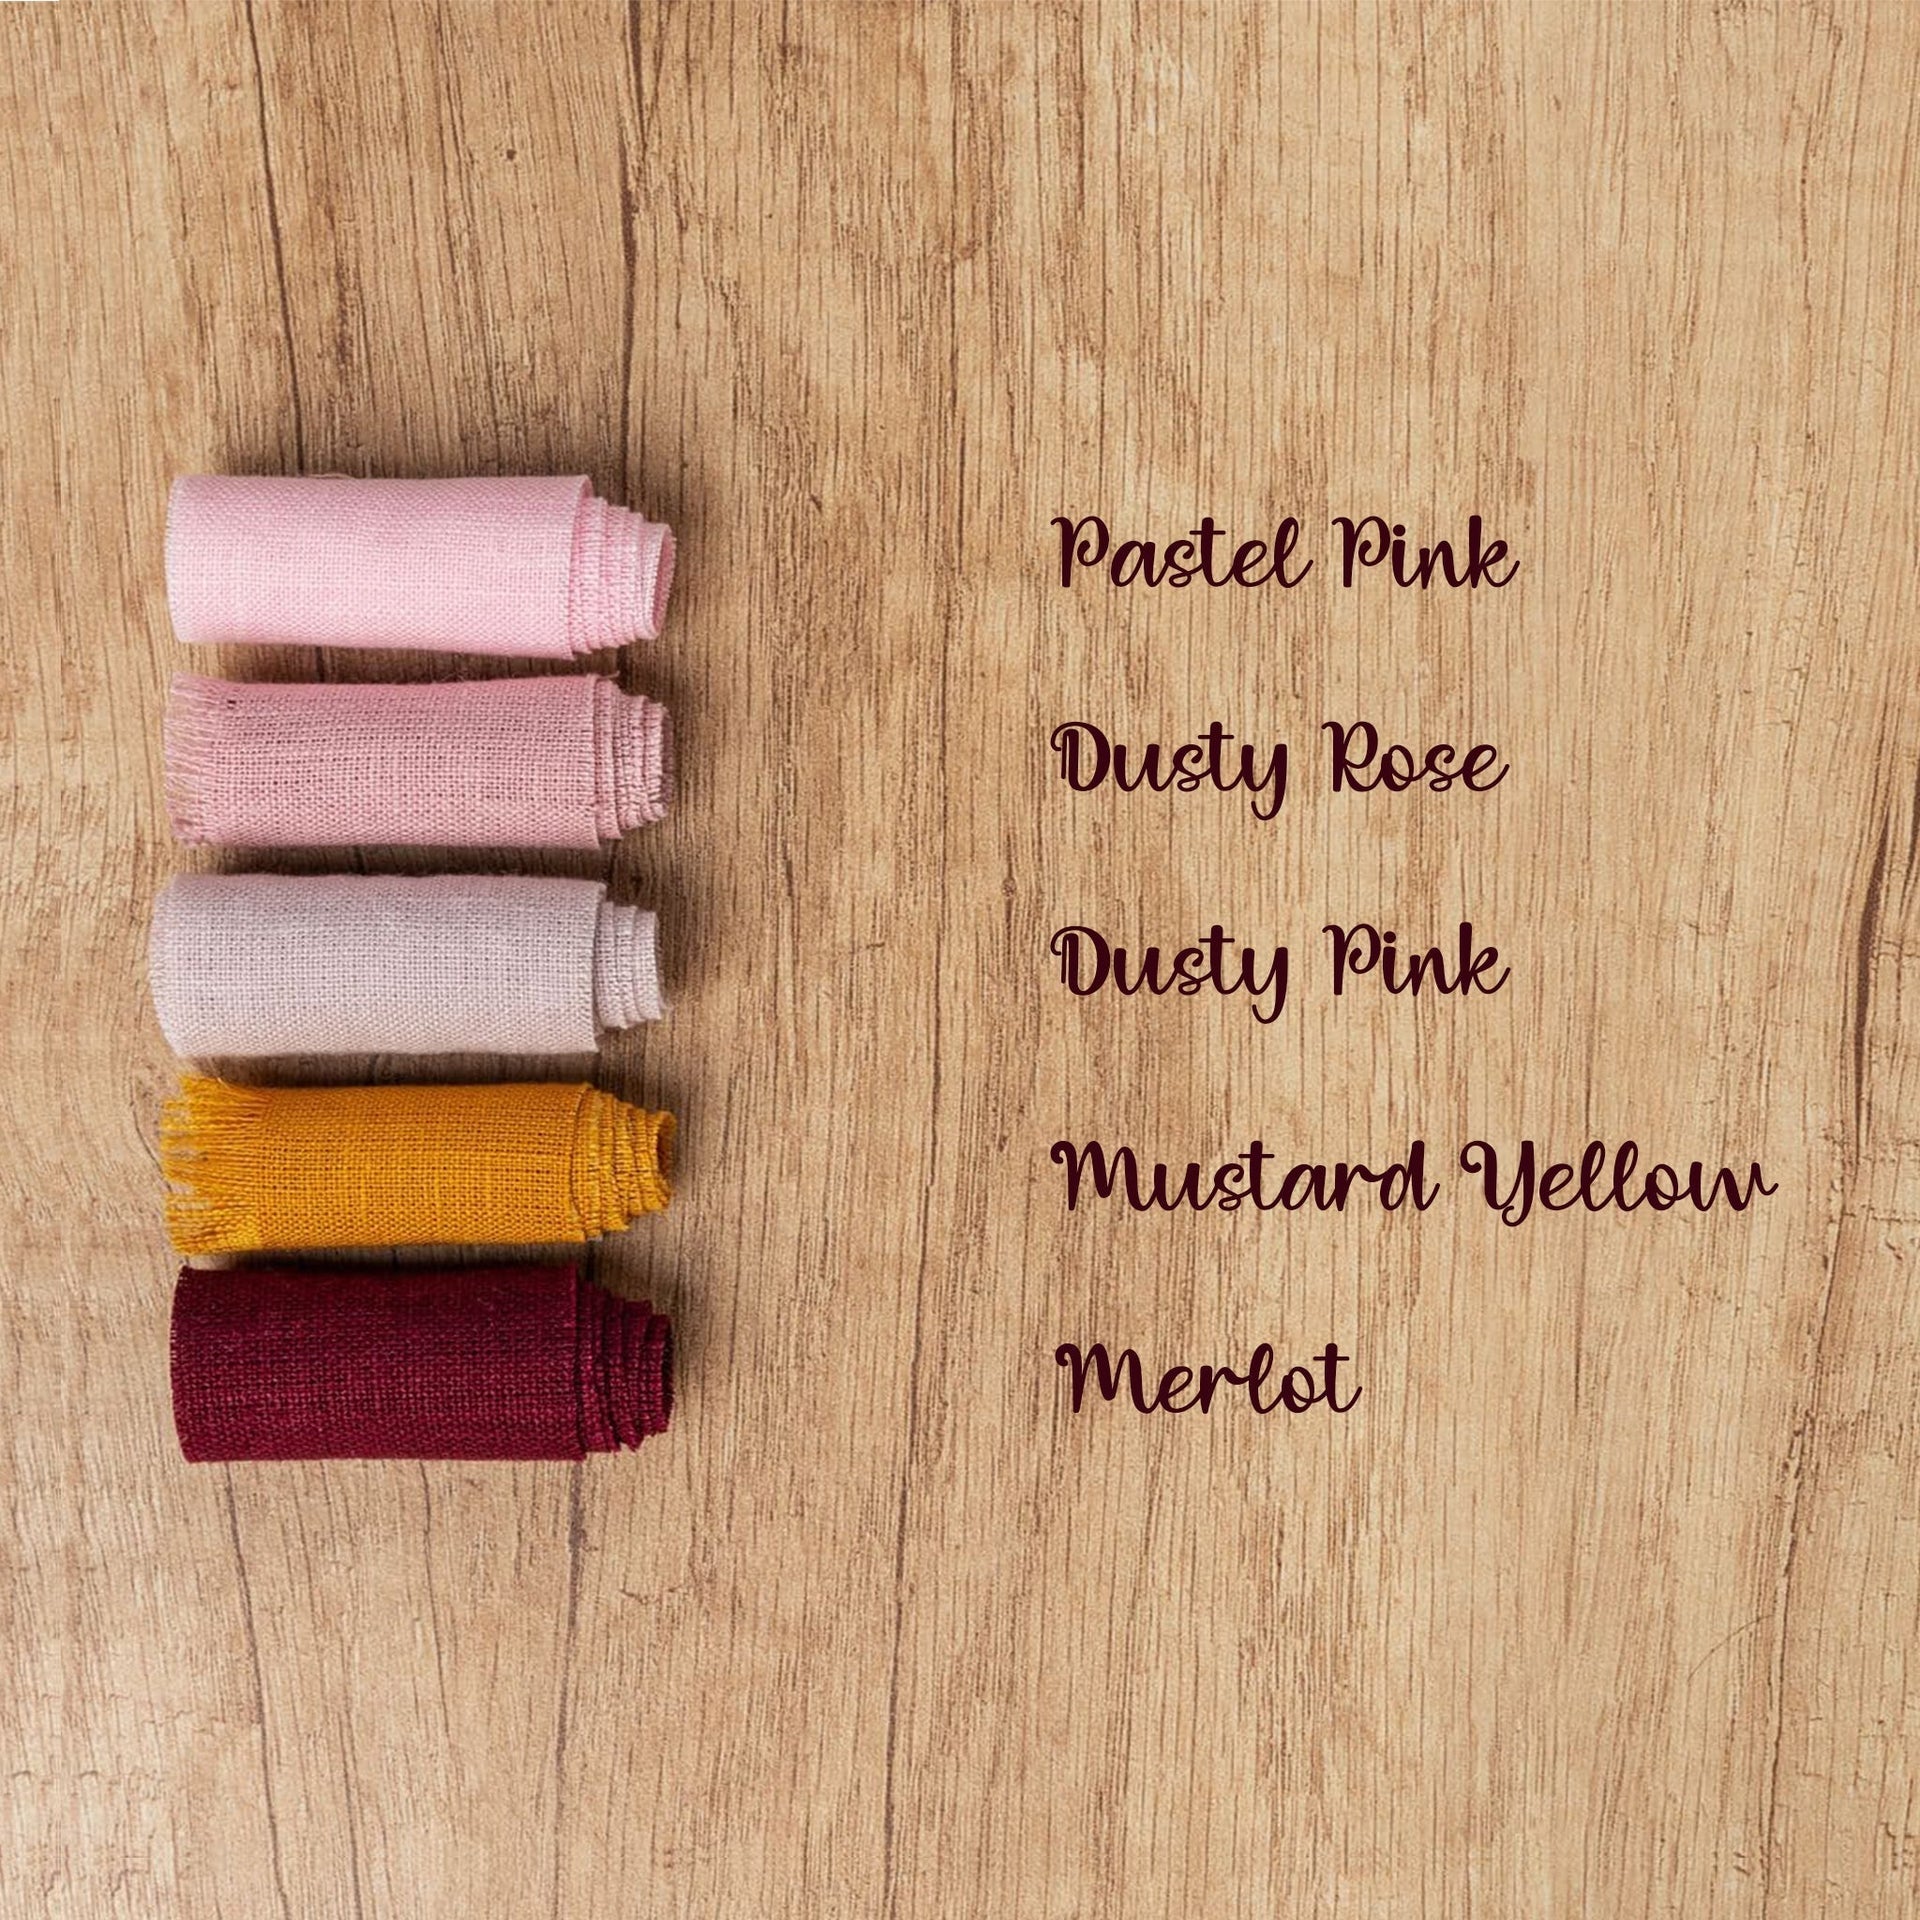 @ color:Mustard Yellow,color:Dusty Pink,color:Dusty Rose, color:Pastel Pink, color:Merlot